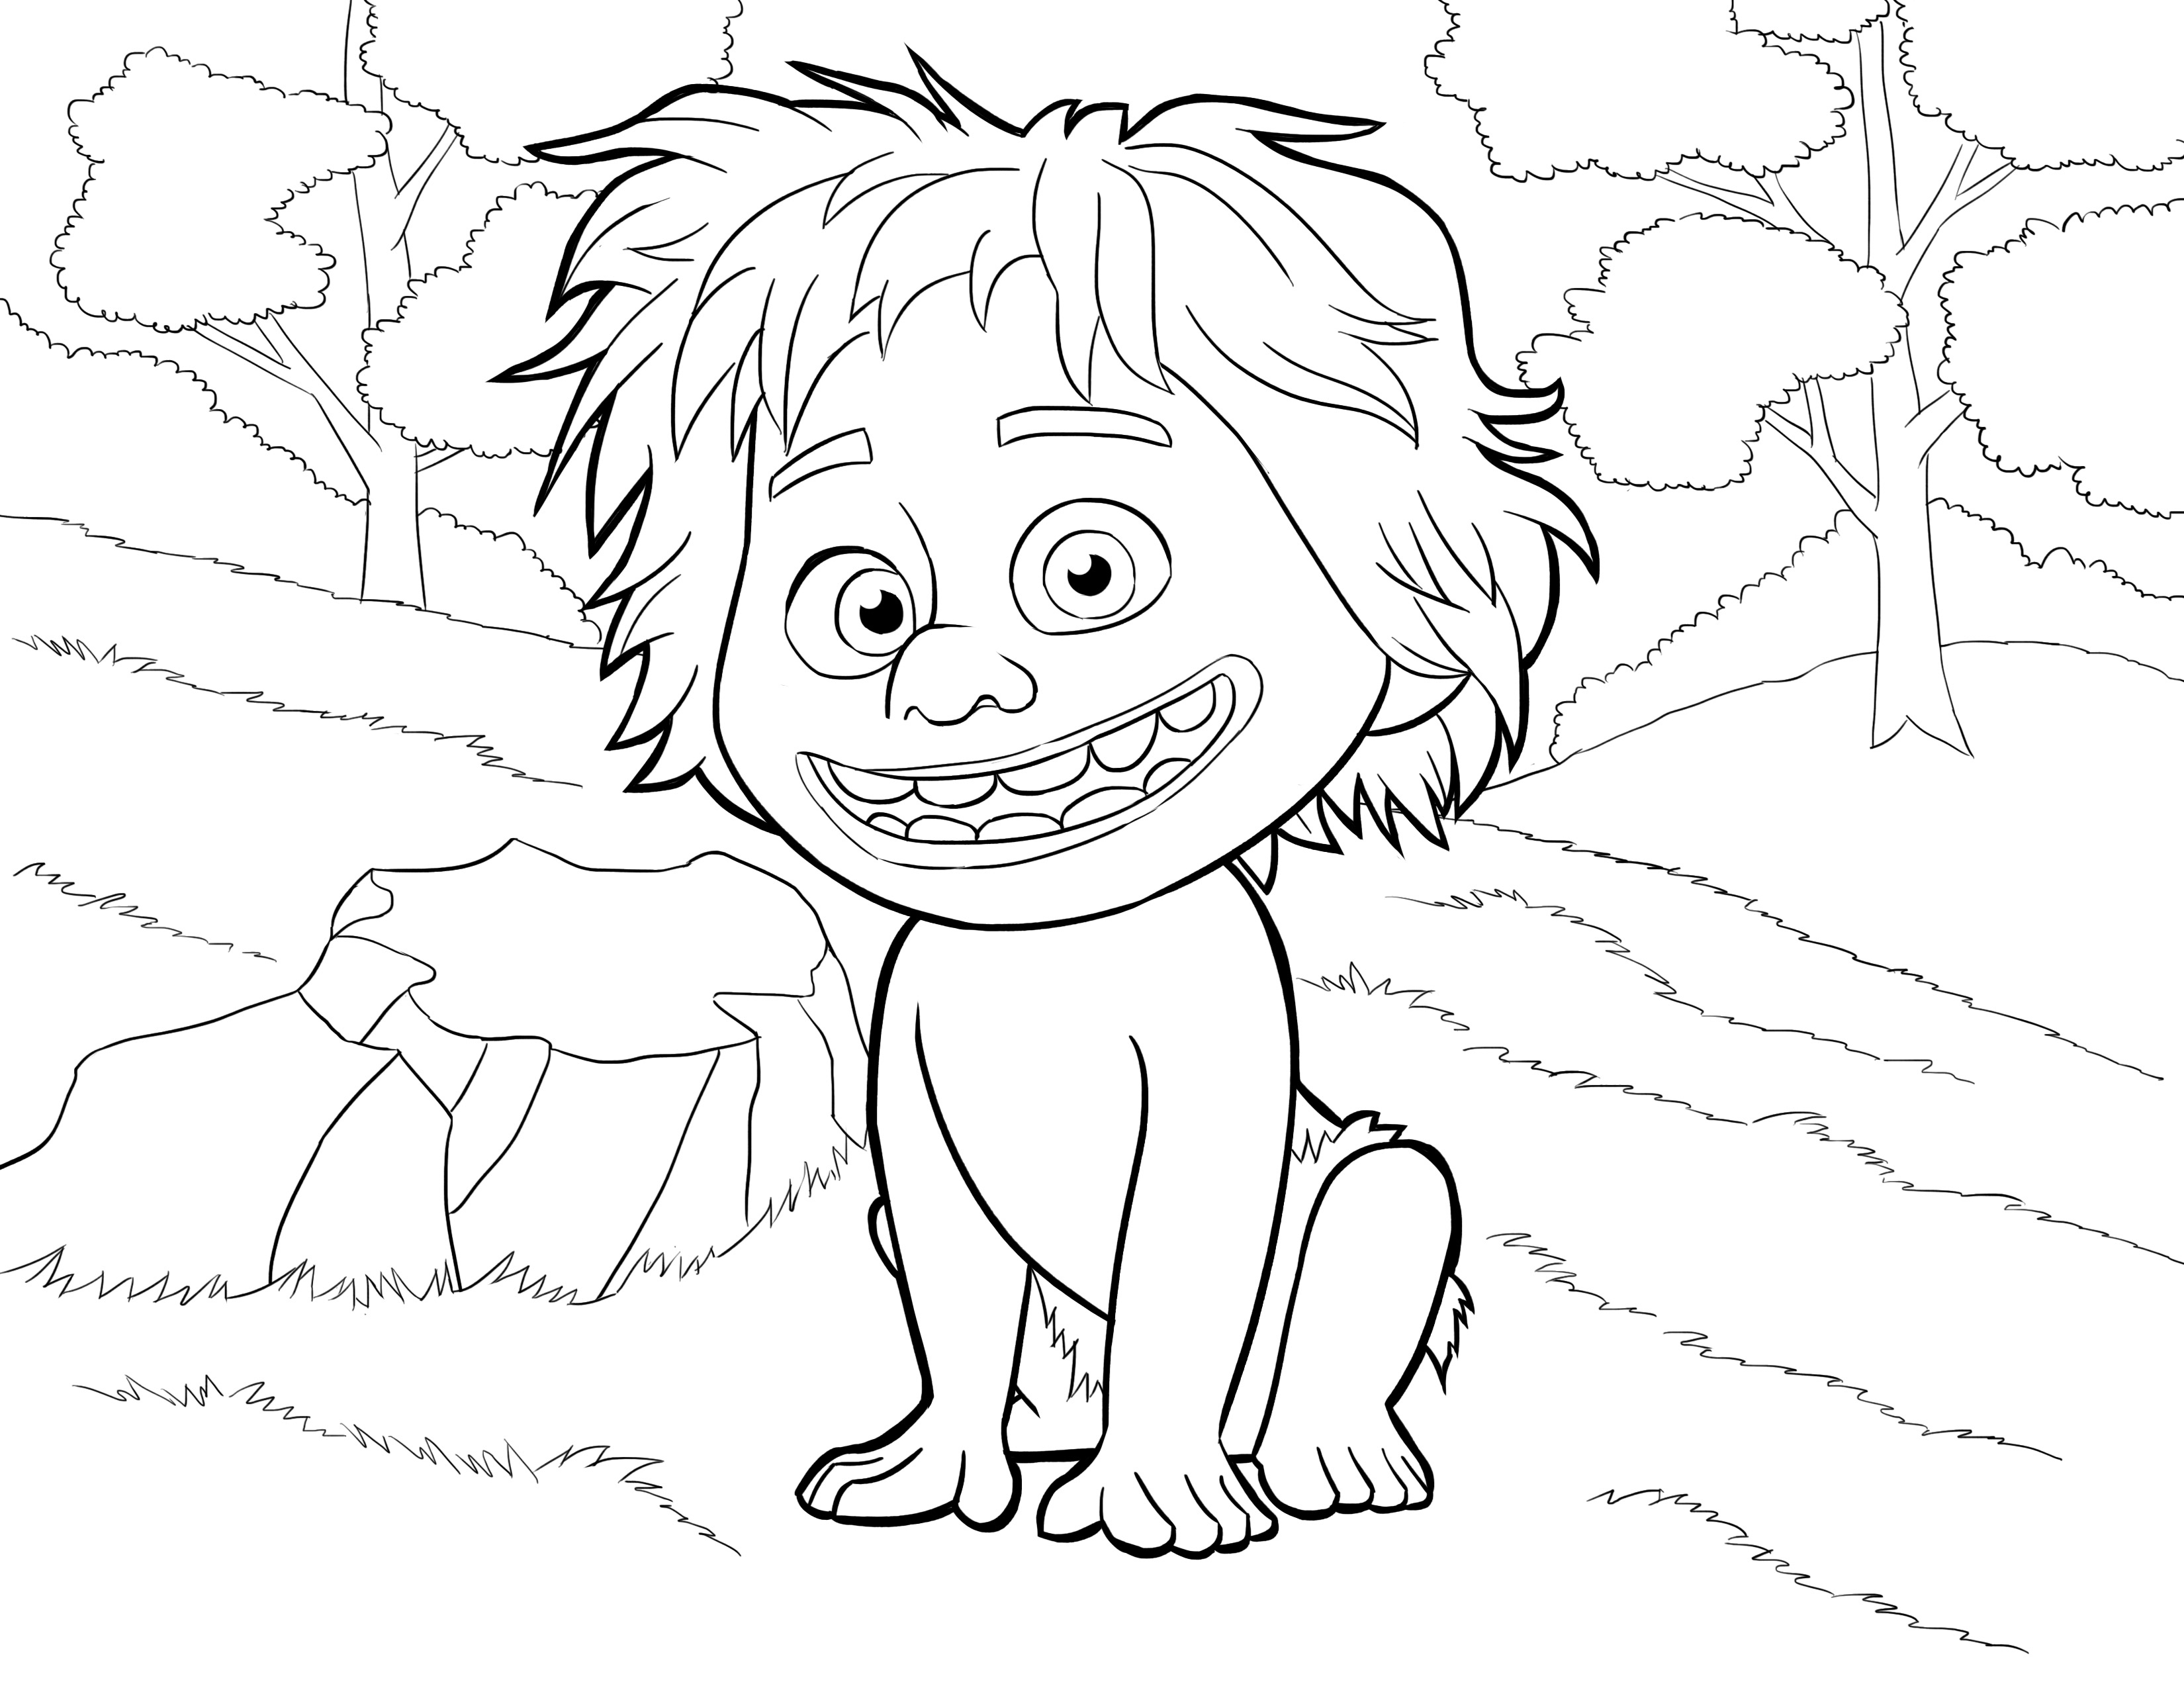 The good dinosaur coloring pages to download and print for